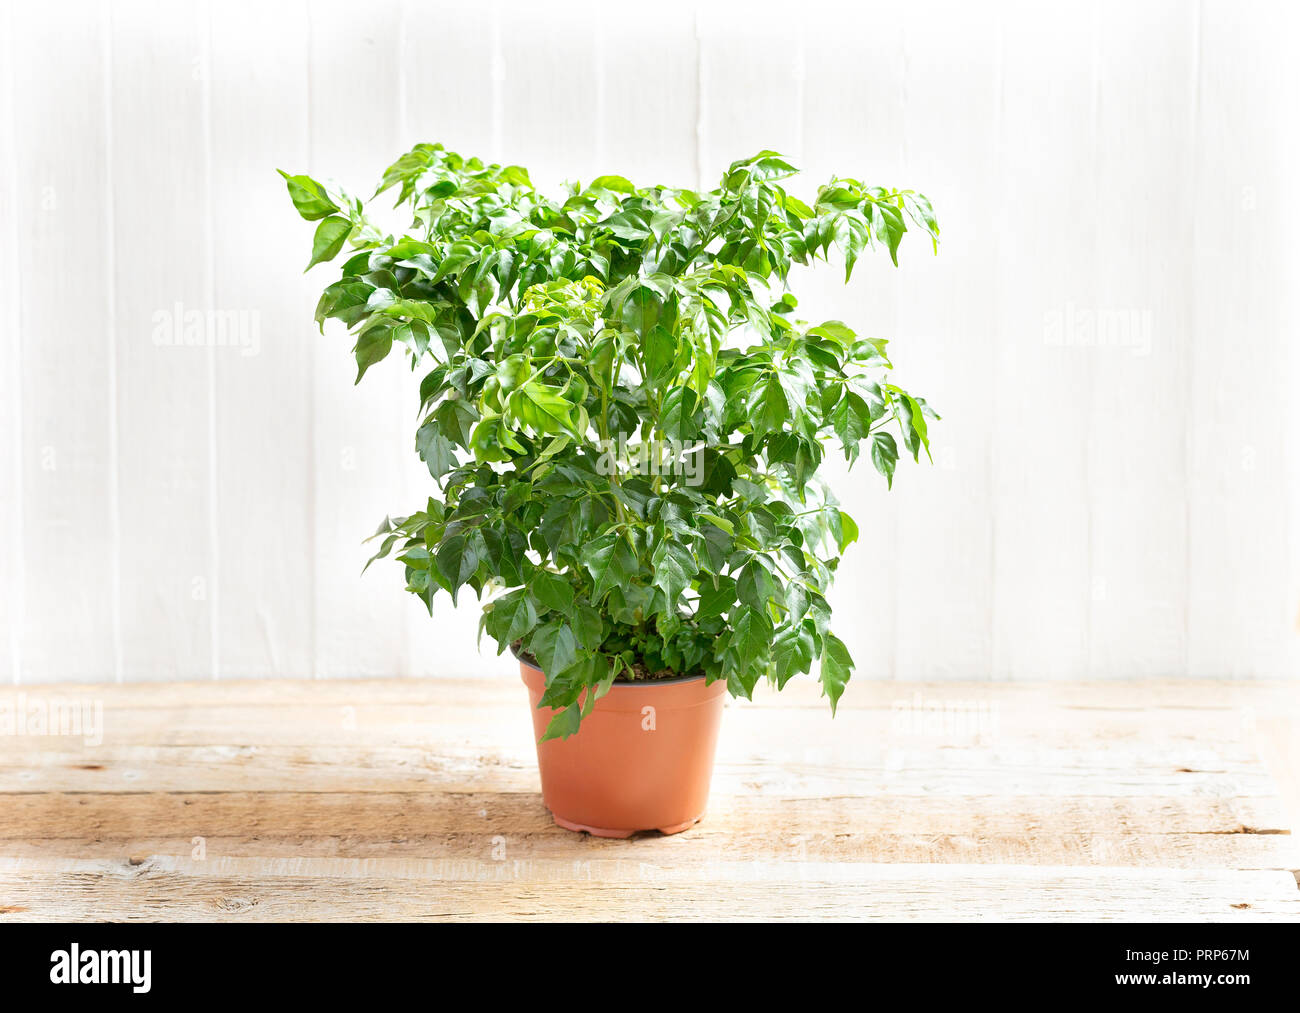 Radermahera in a flower pot on a light wooden background. Stock Photo